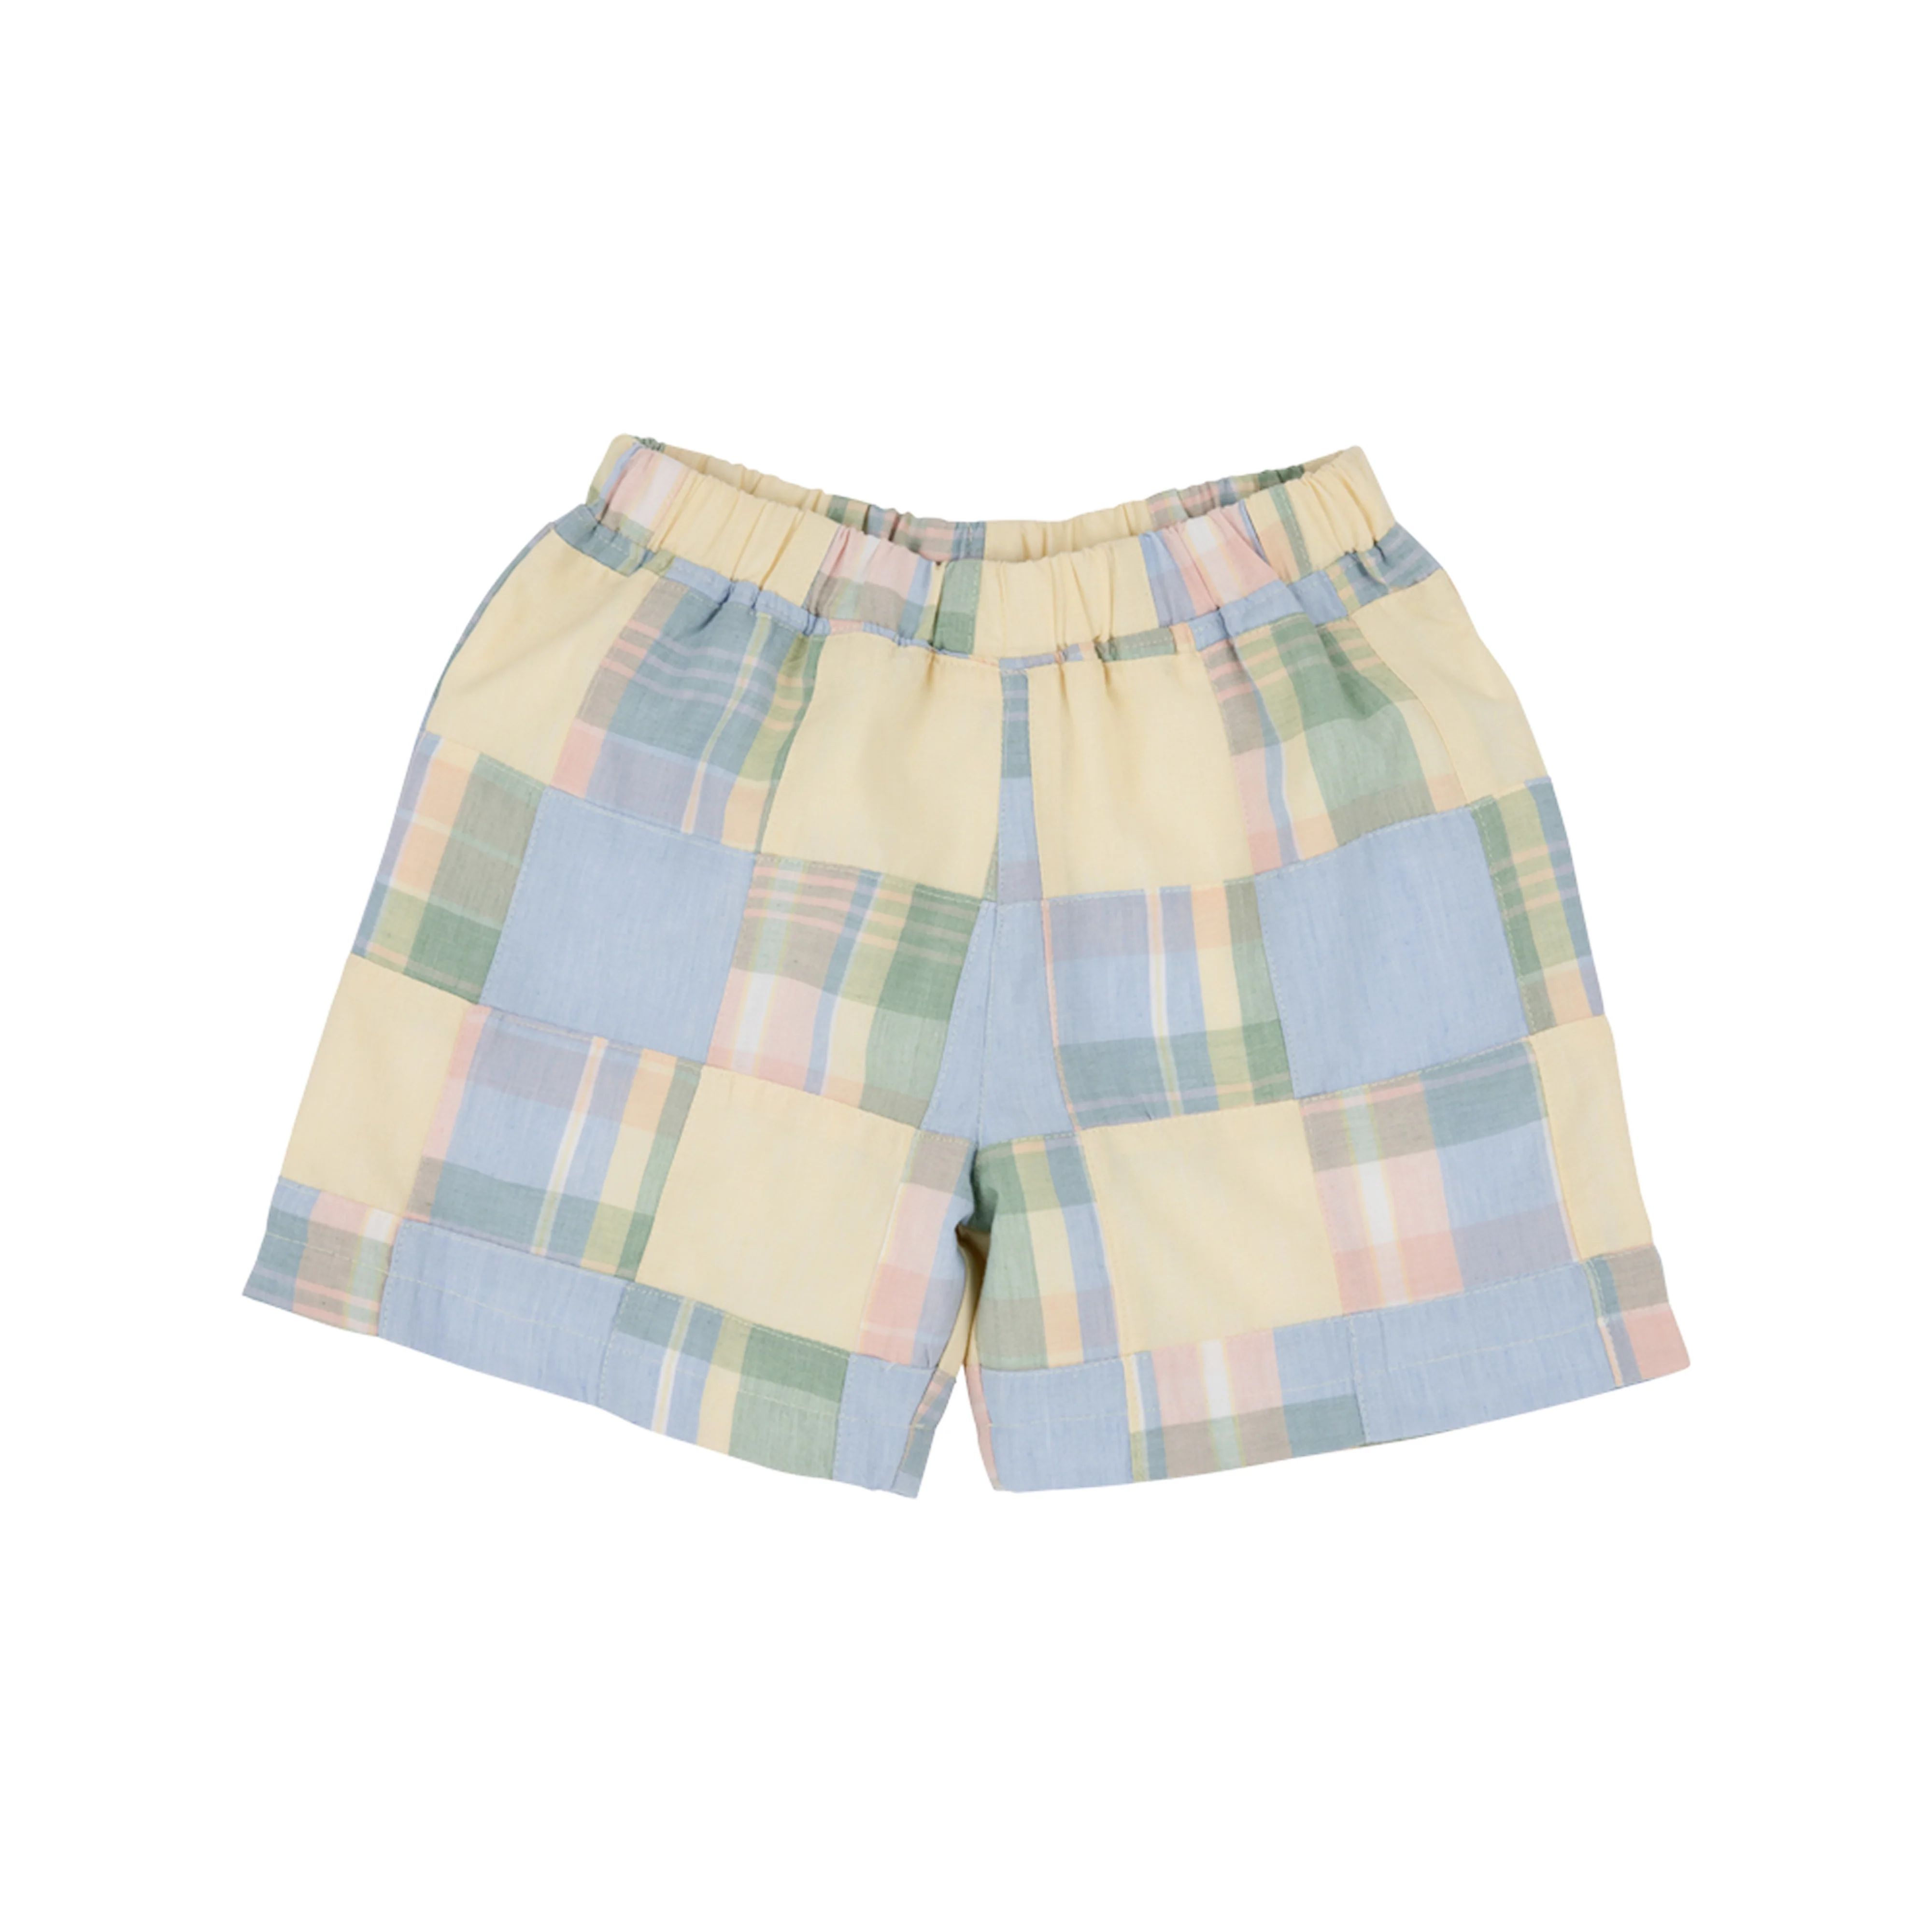 Shelton Shorts - May River Madras with Worth Avenue White Stork | The Beaufort Bonnet Company